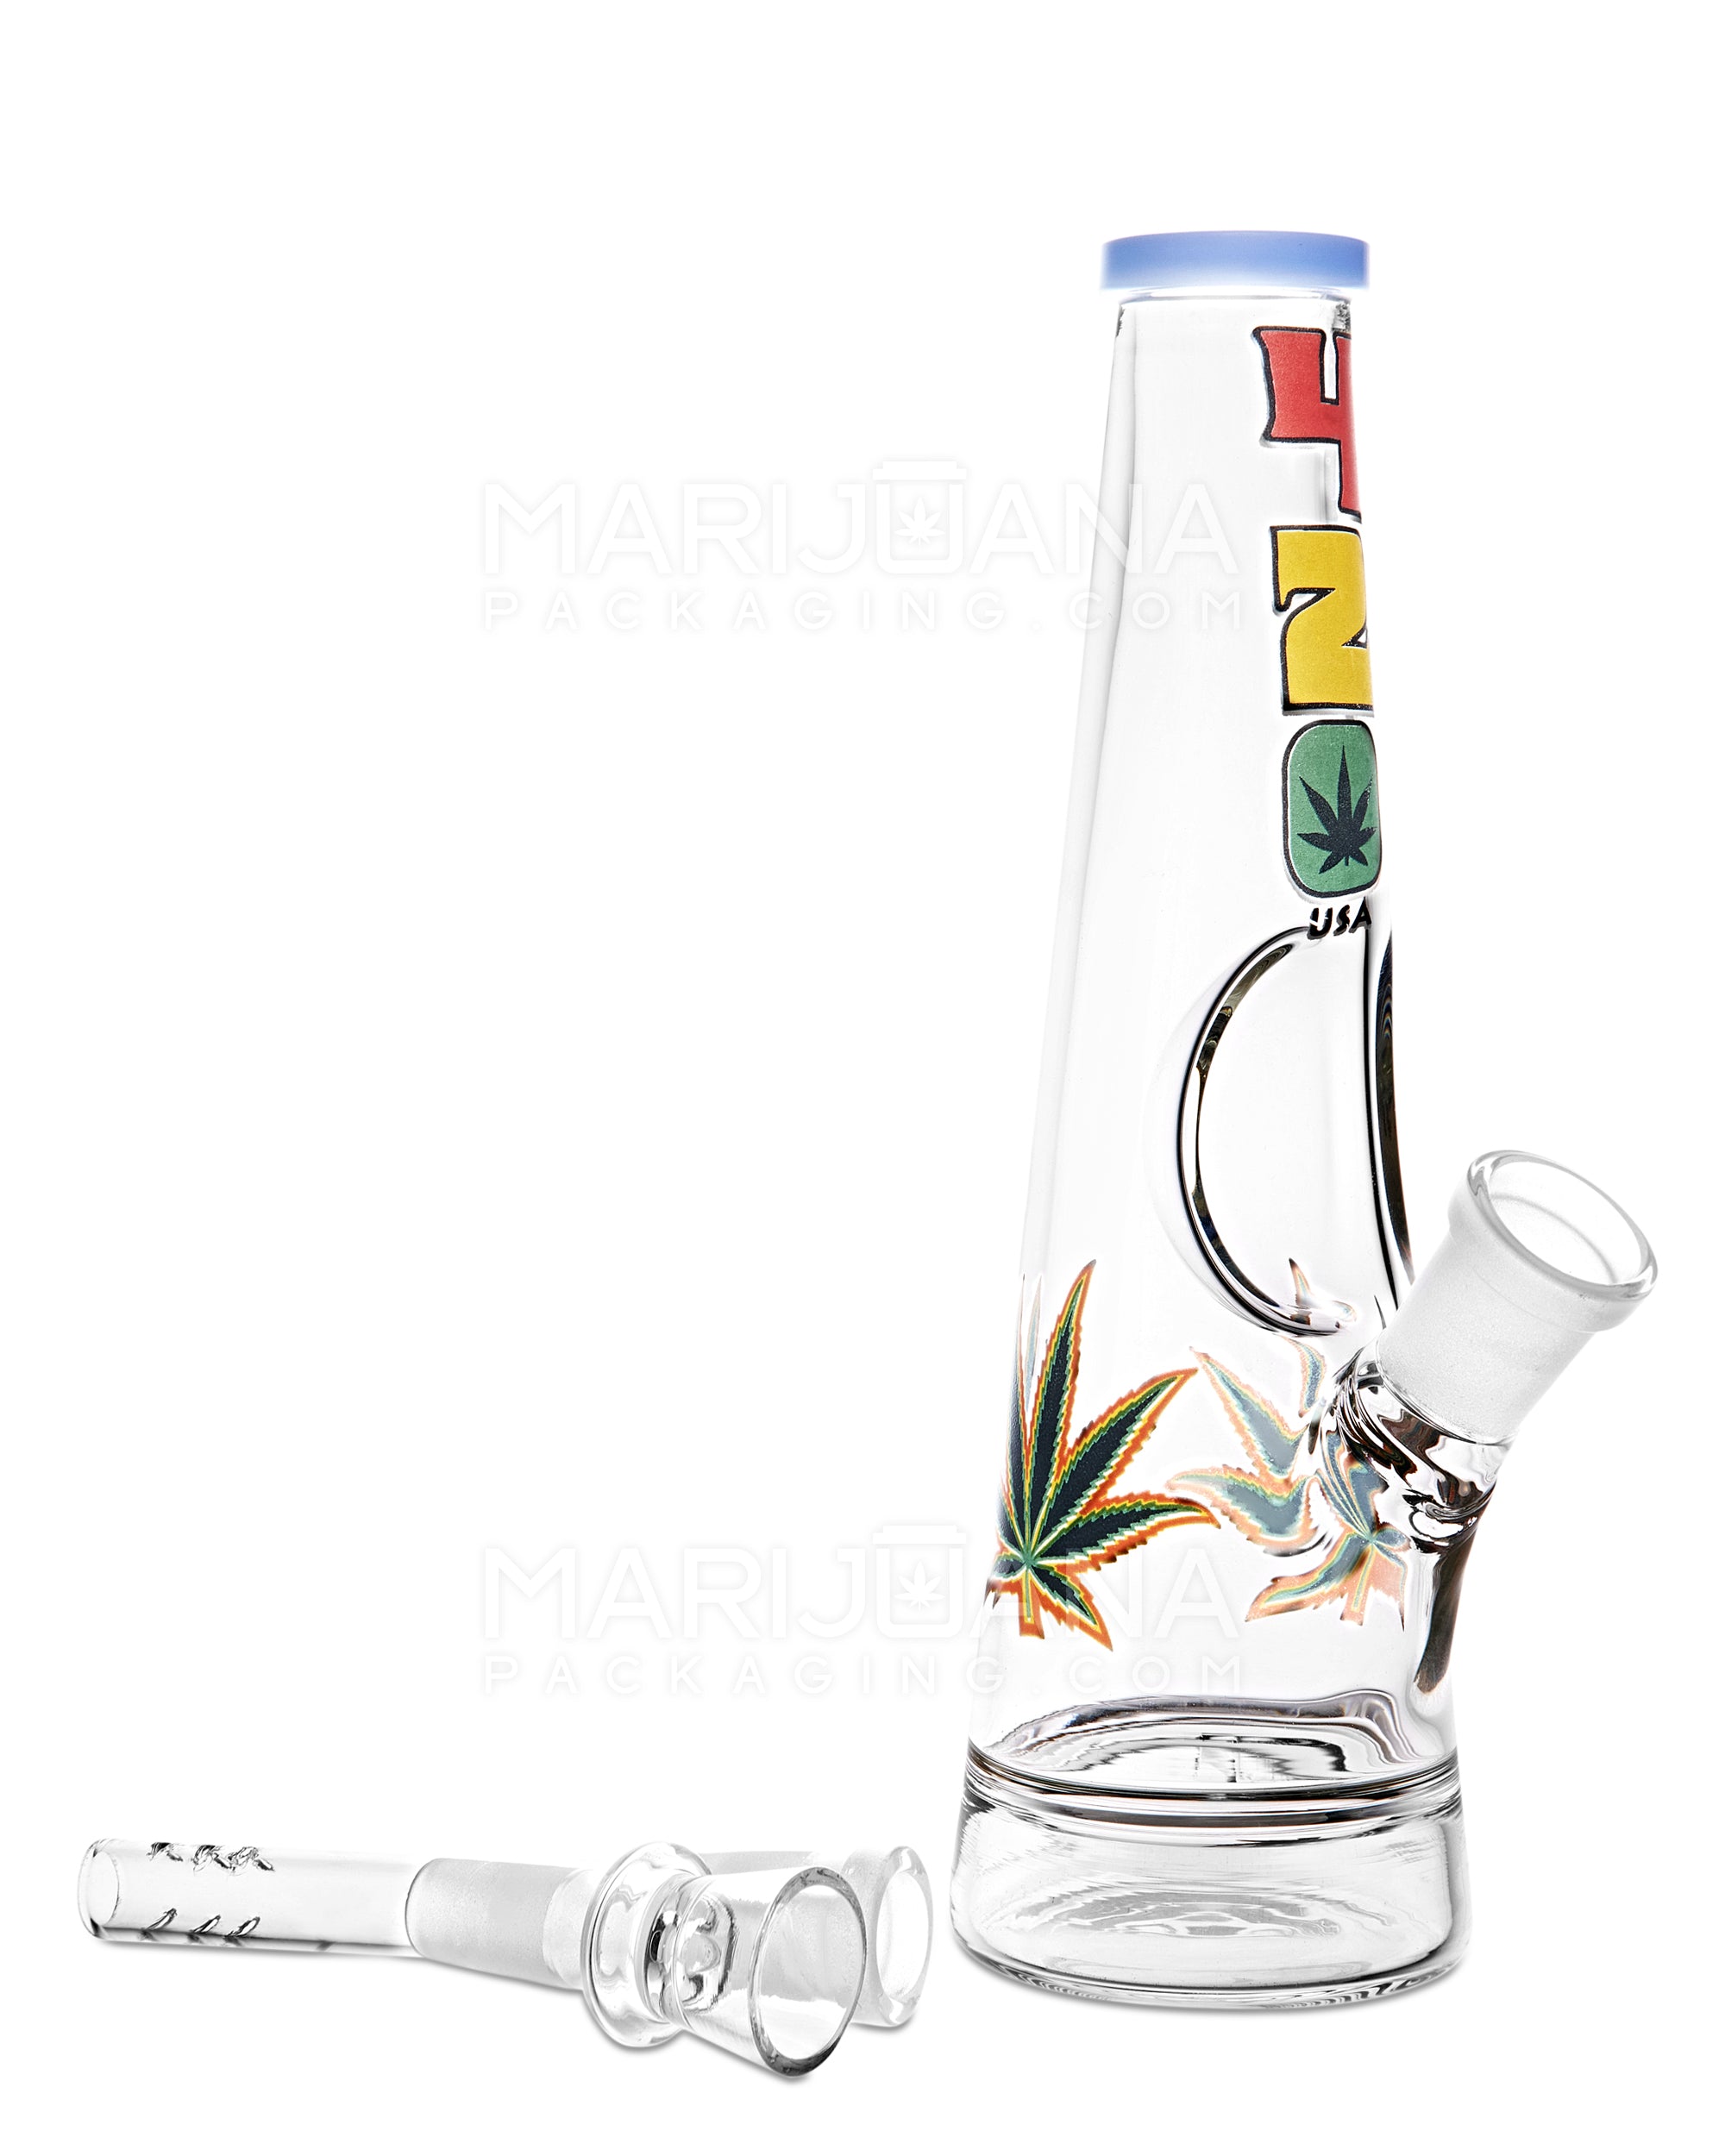 Straight Neck Decal Diffused Glass Cone Water Pipe w/ Ice Catcher | 8.5in Tall - 14mm Bowl - Assorted - 2